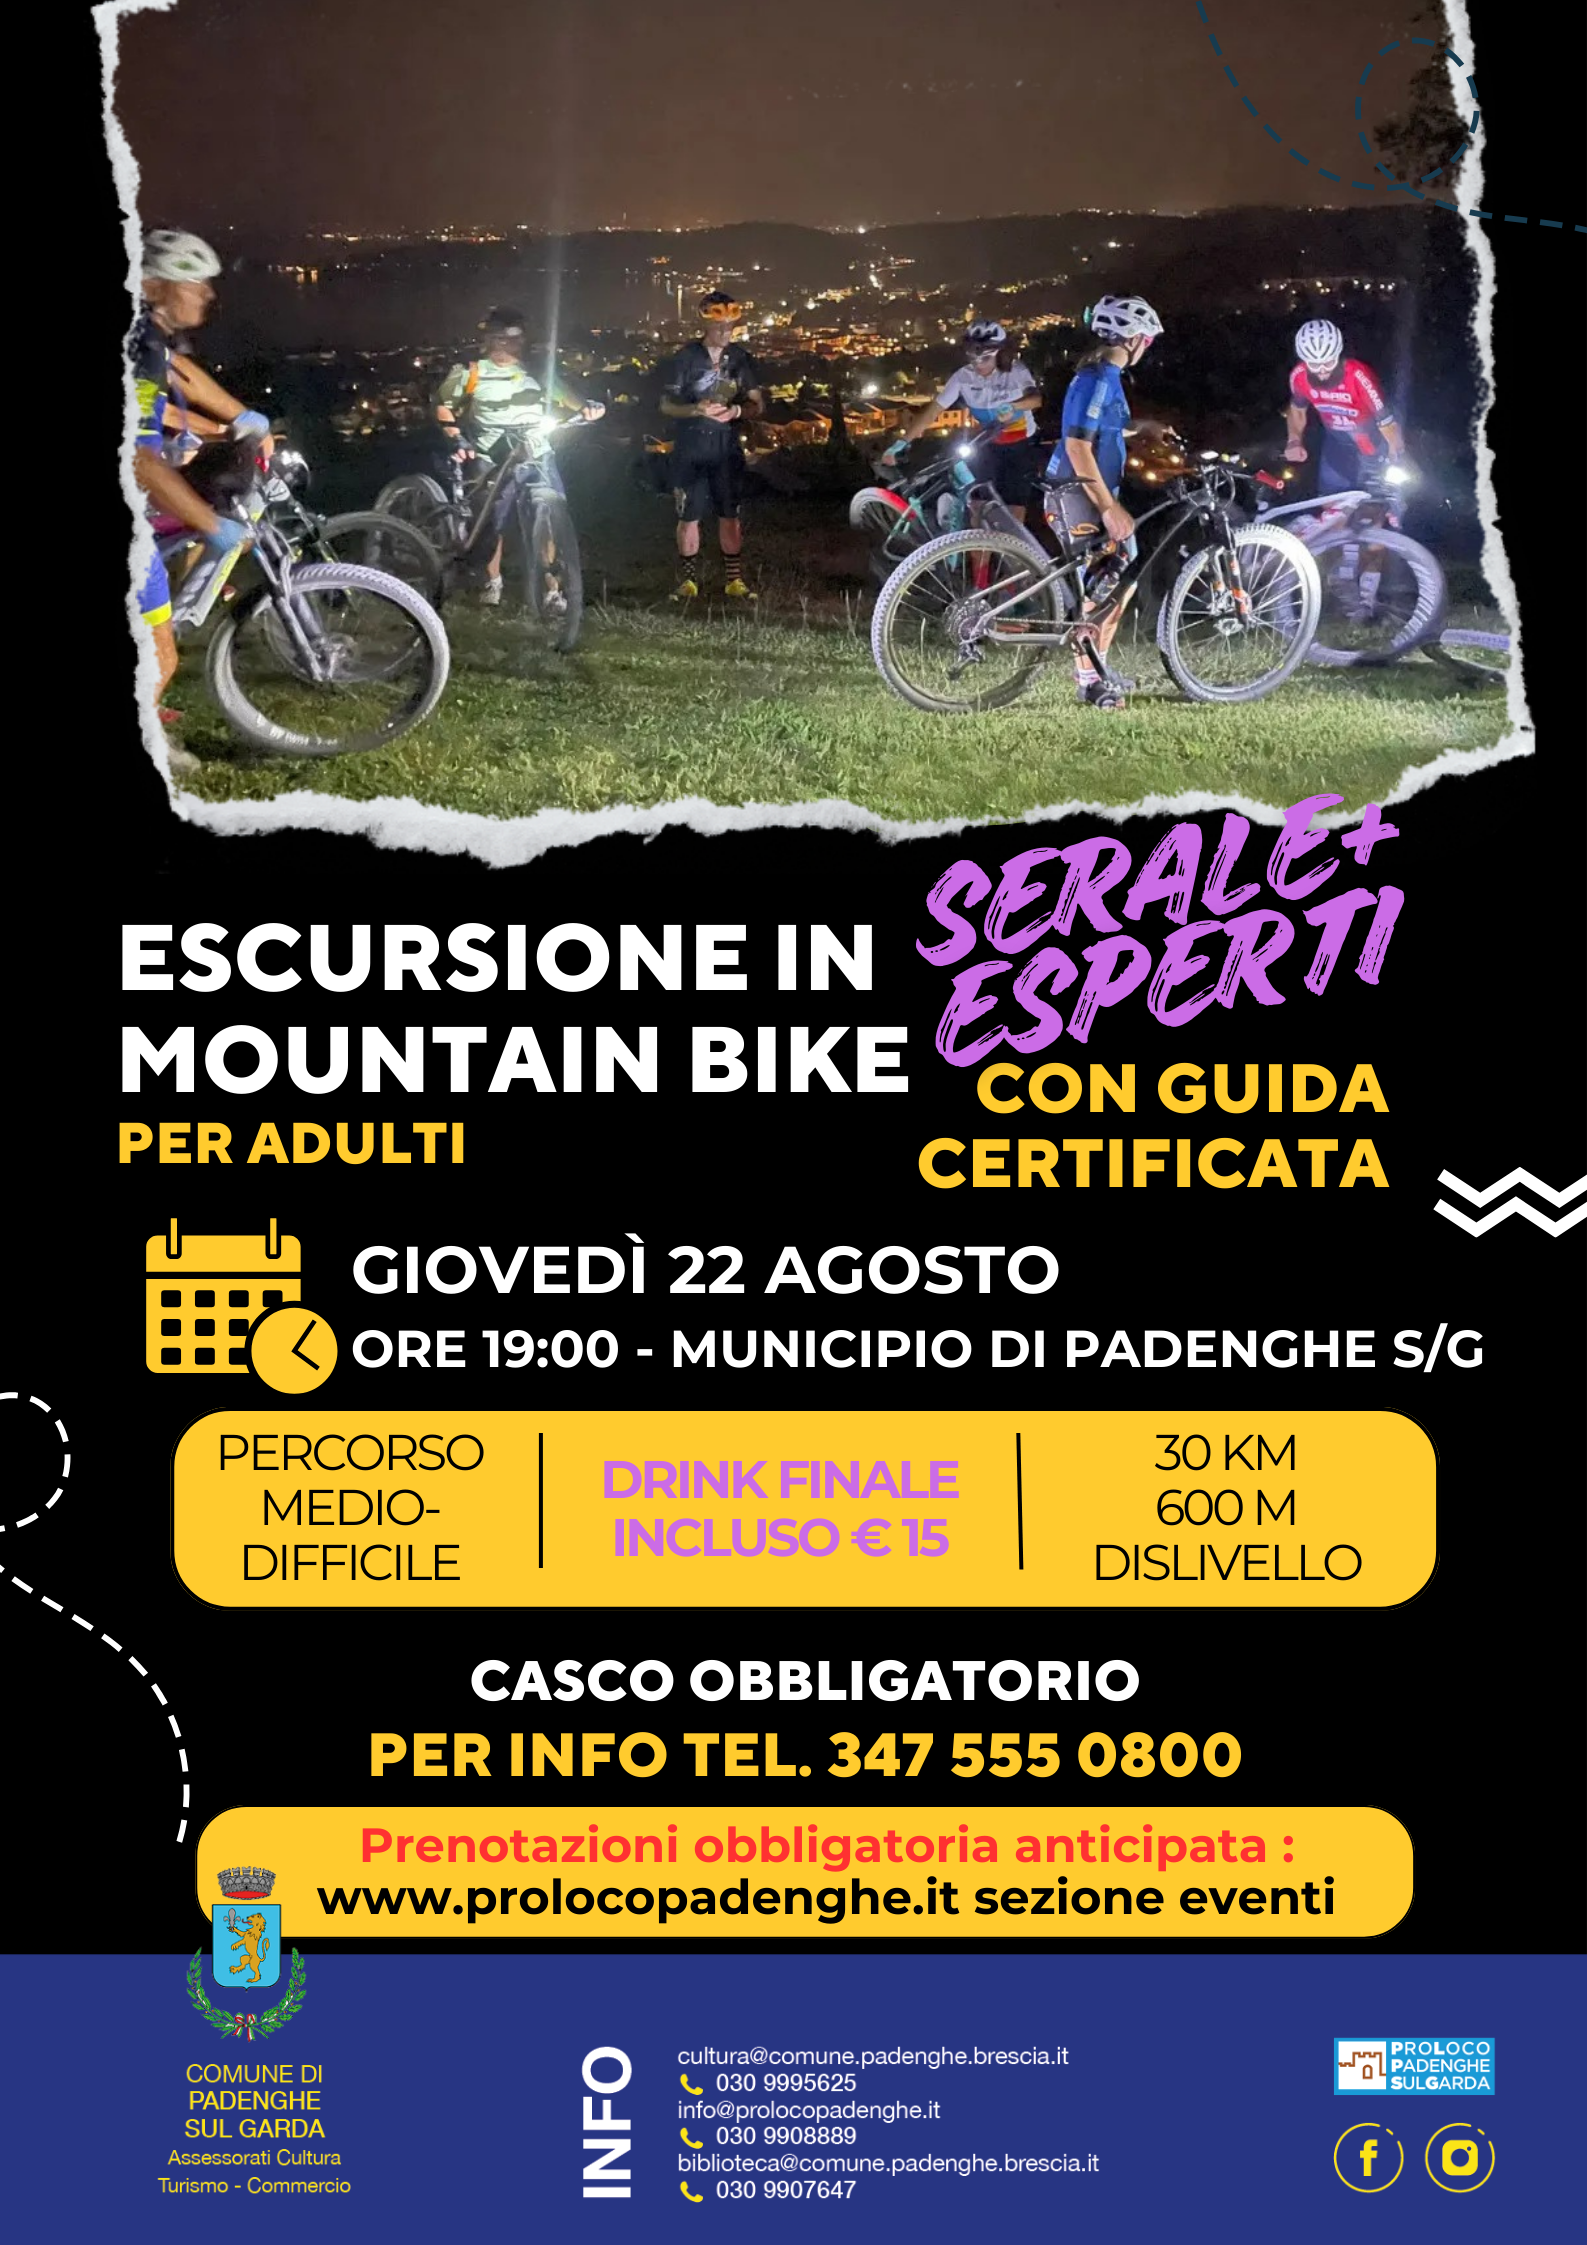 EVENING MOUNTAIN BIKE EXCURSION FOR EXPERTS 22nd AUGUST